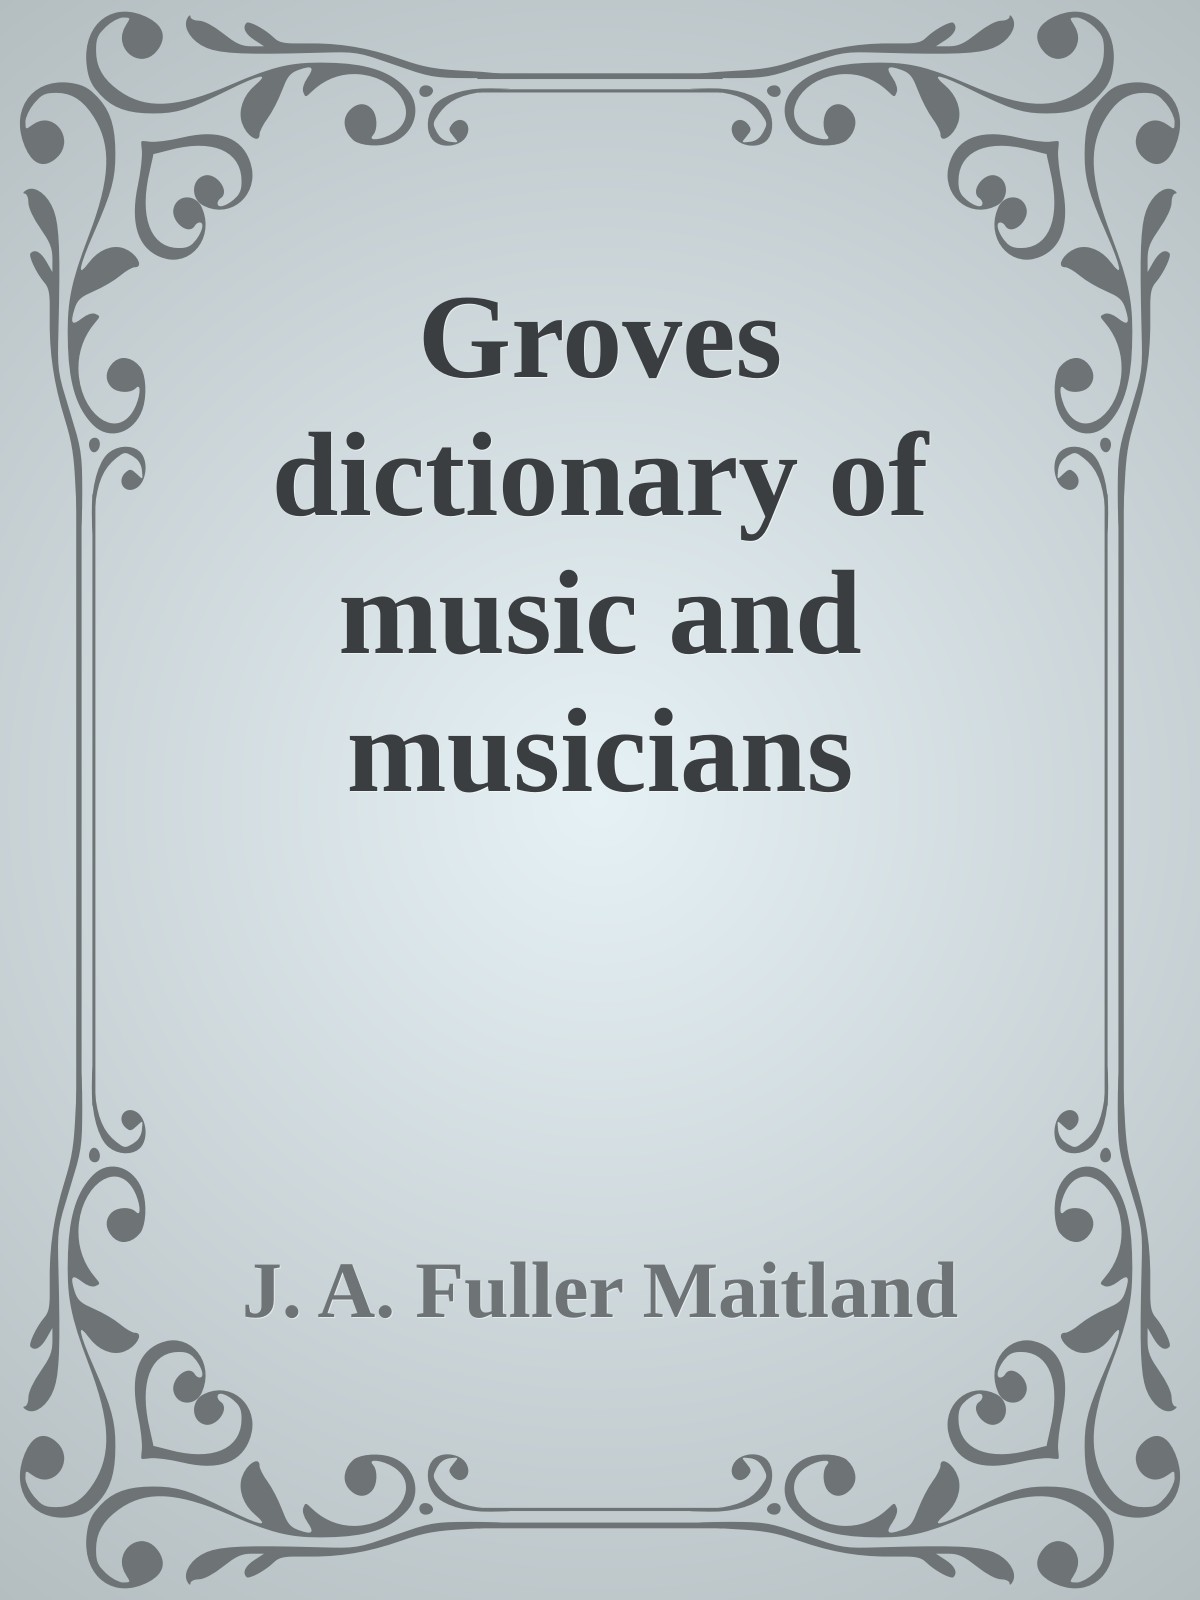 Groves dictionary of music and musicians